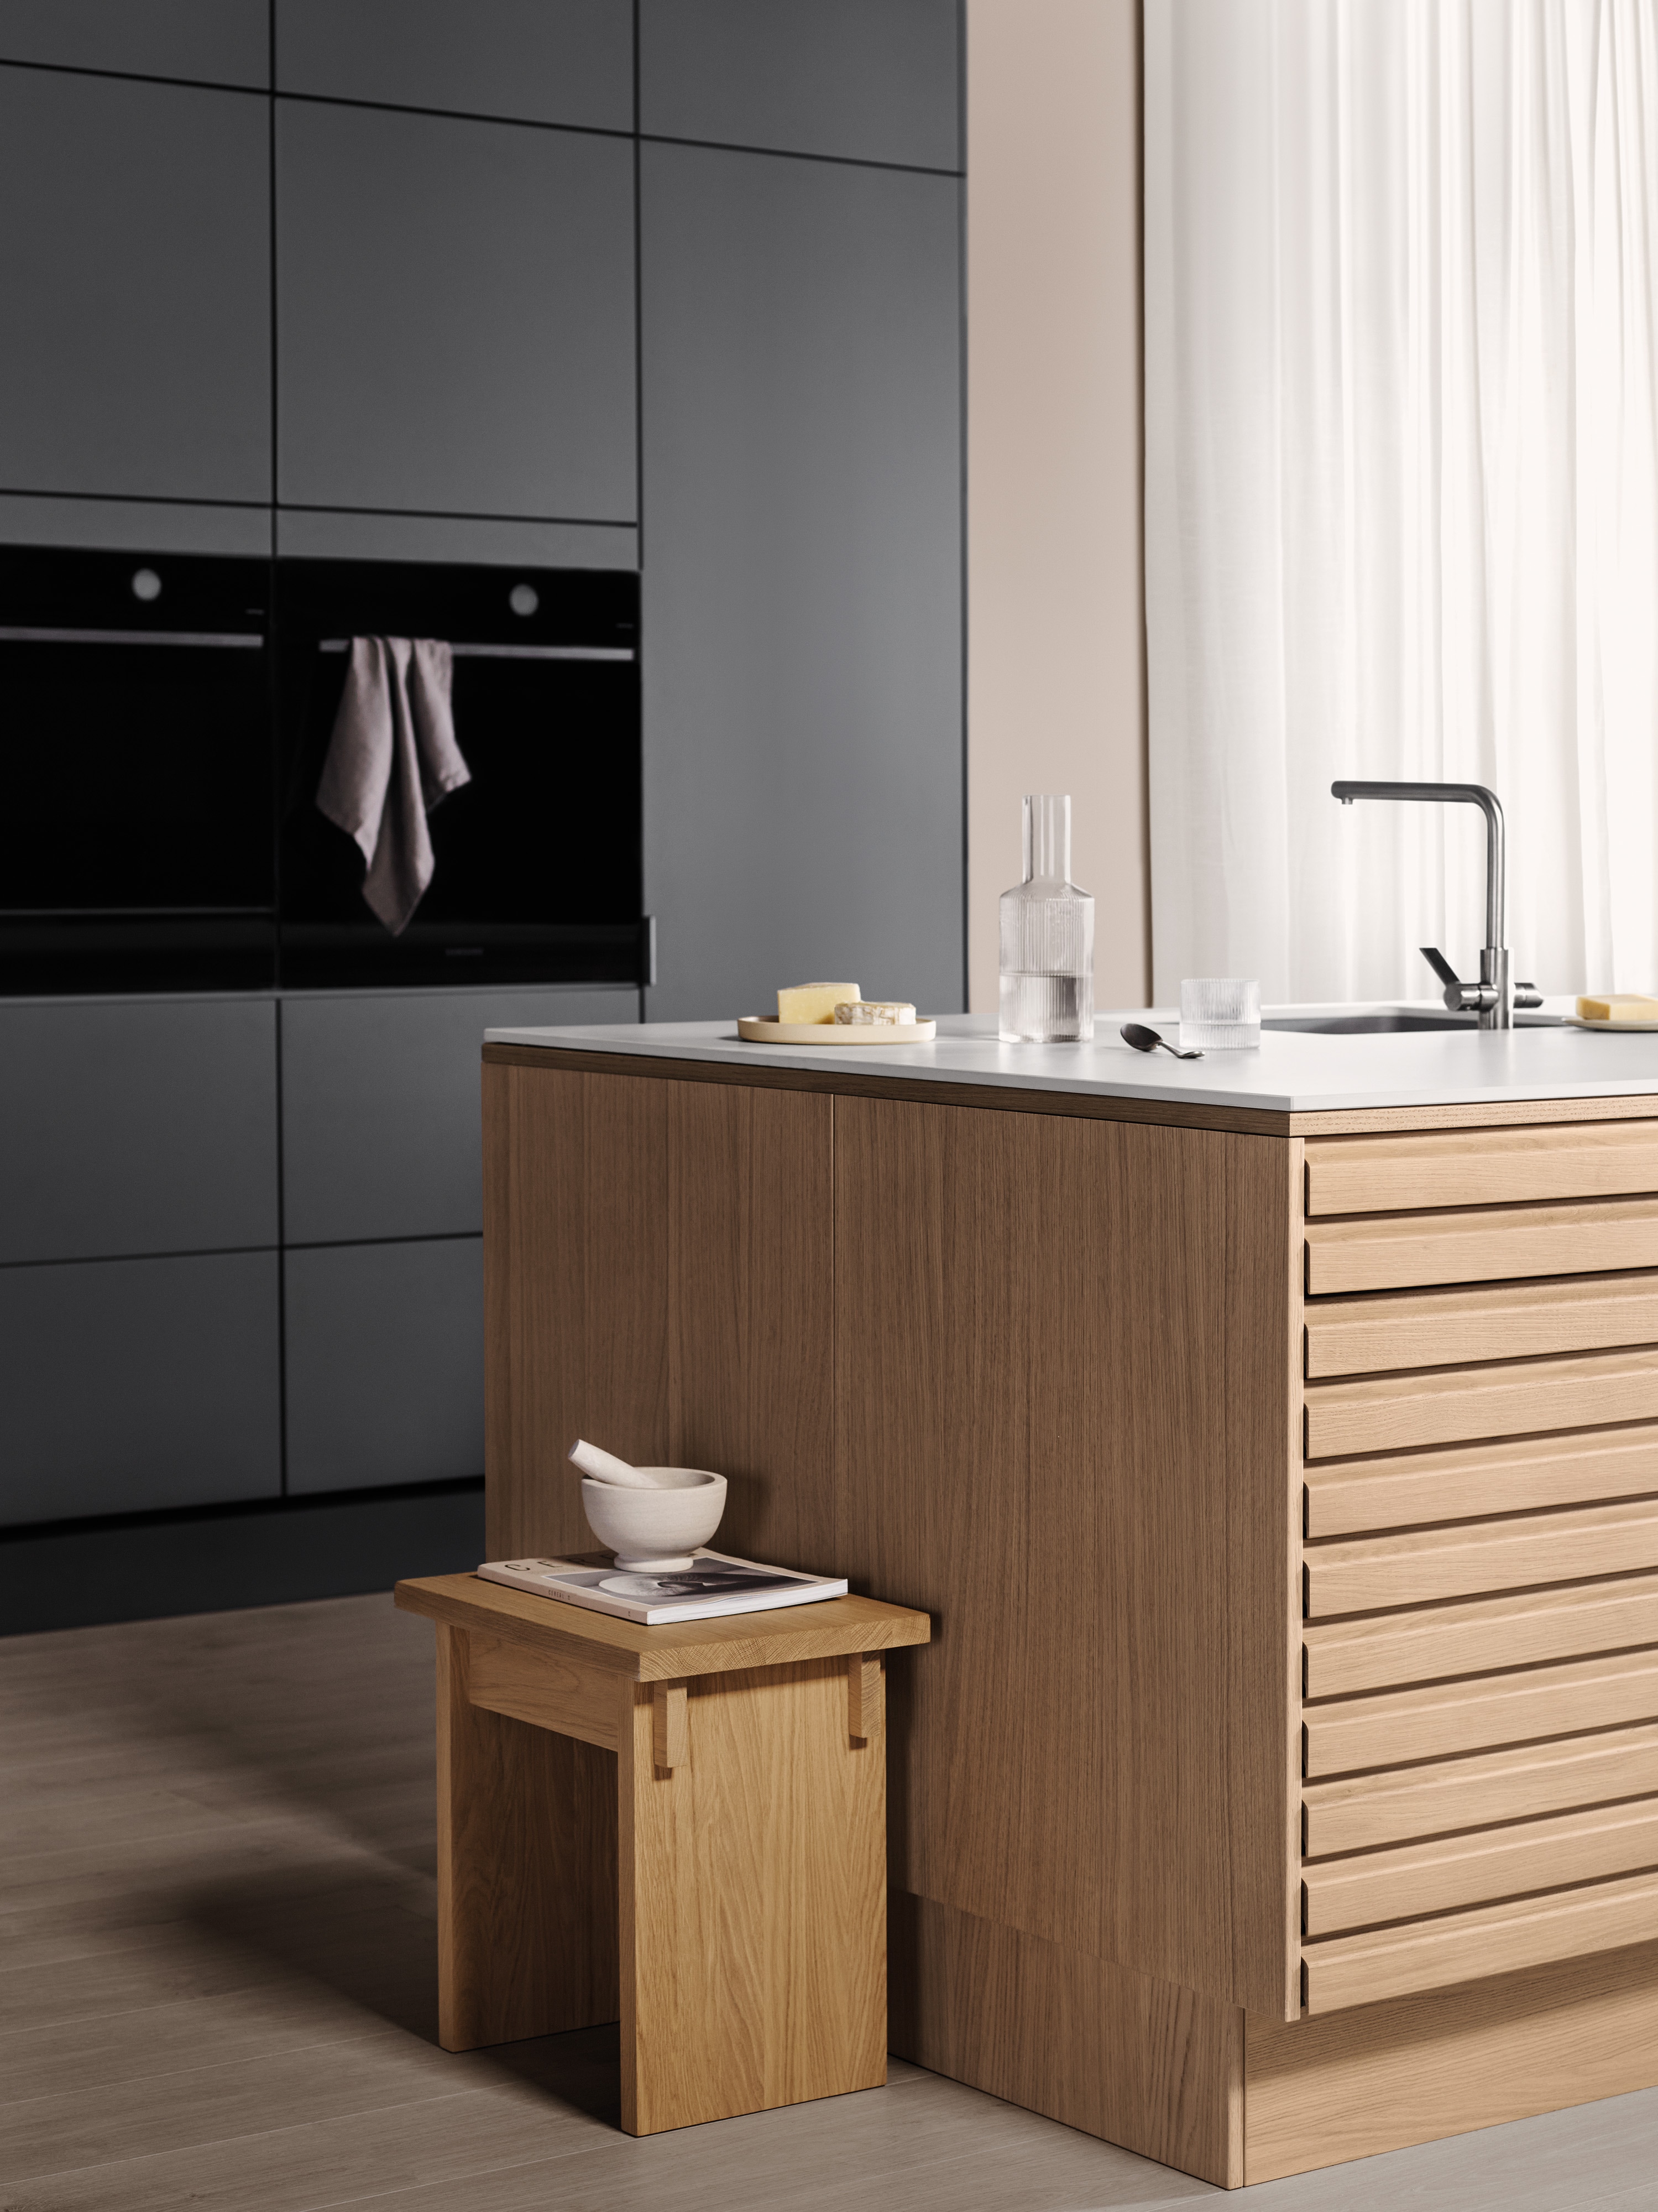 Image collection - Epoq kitchen without handles